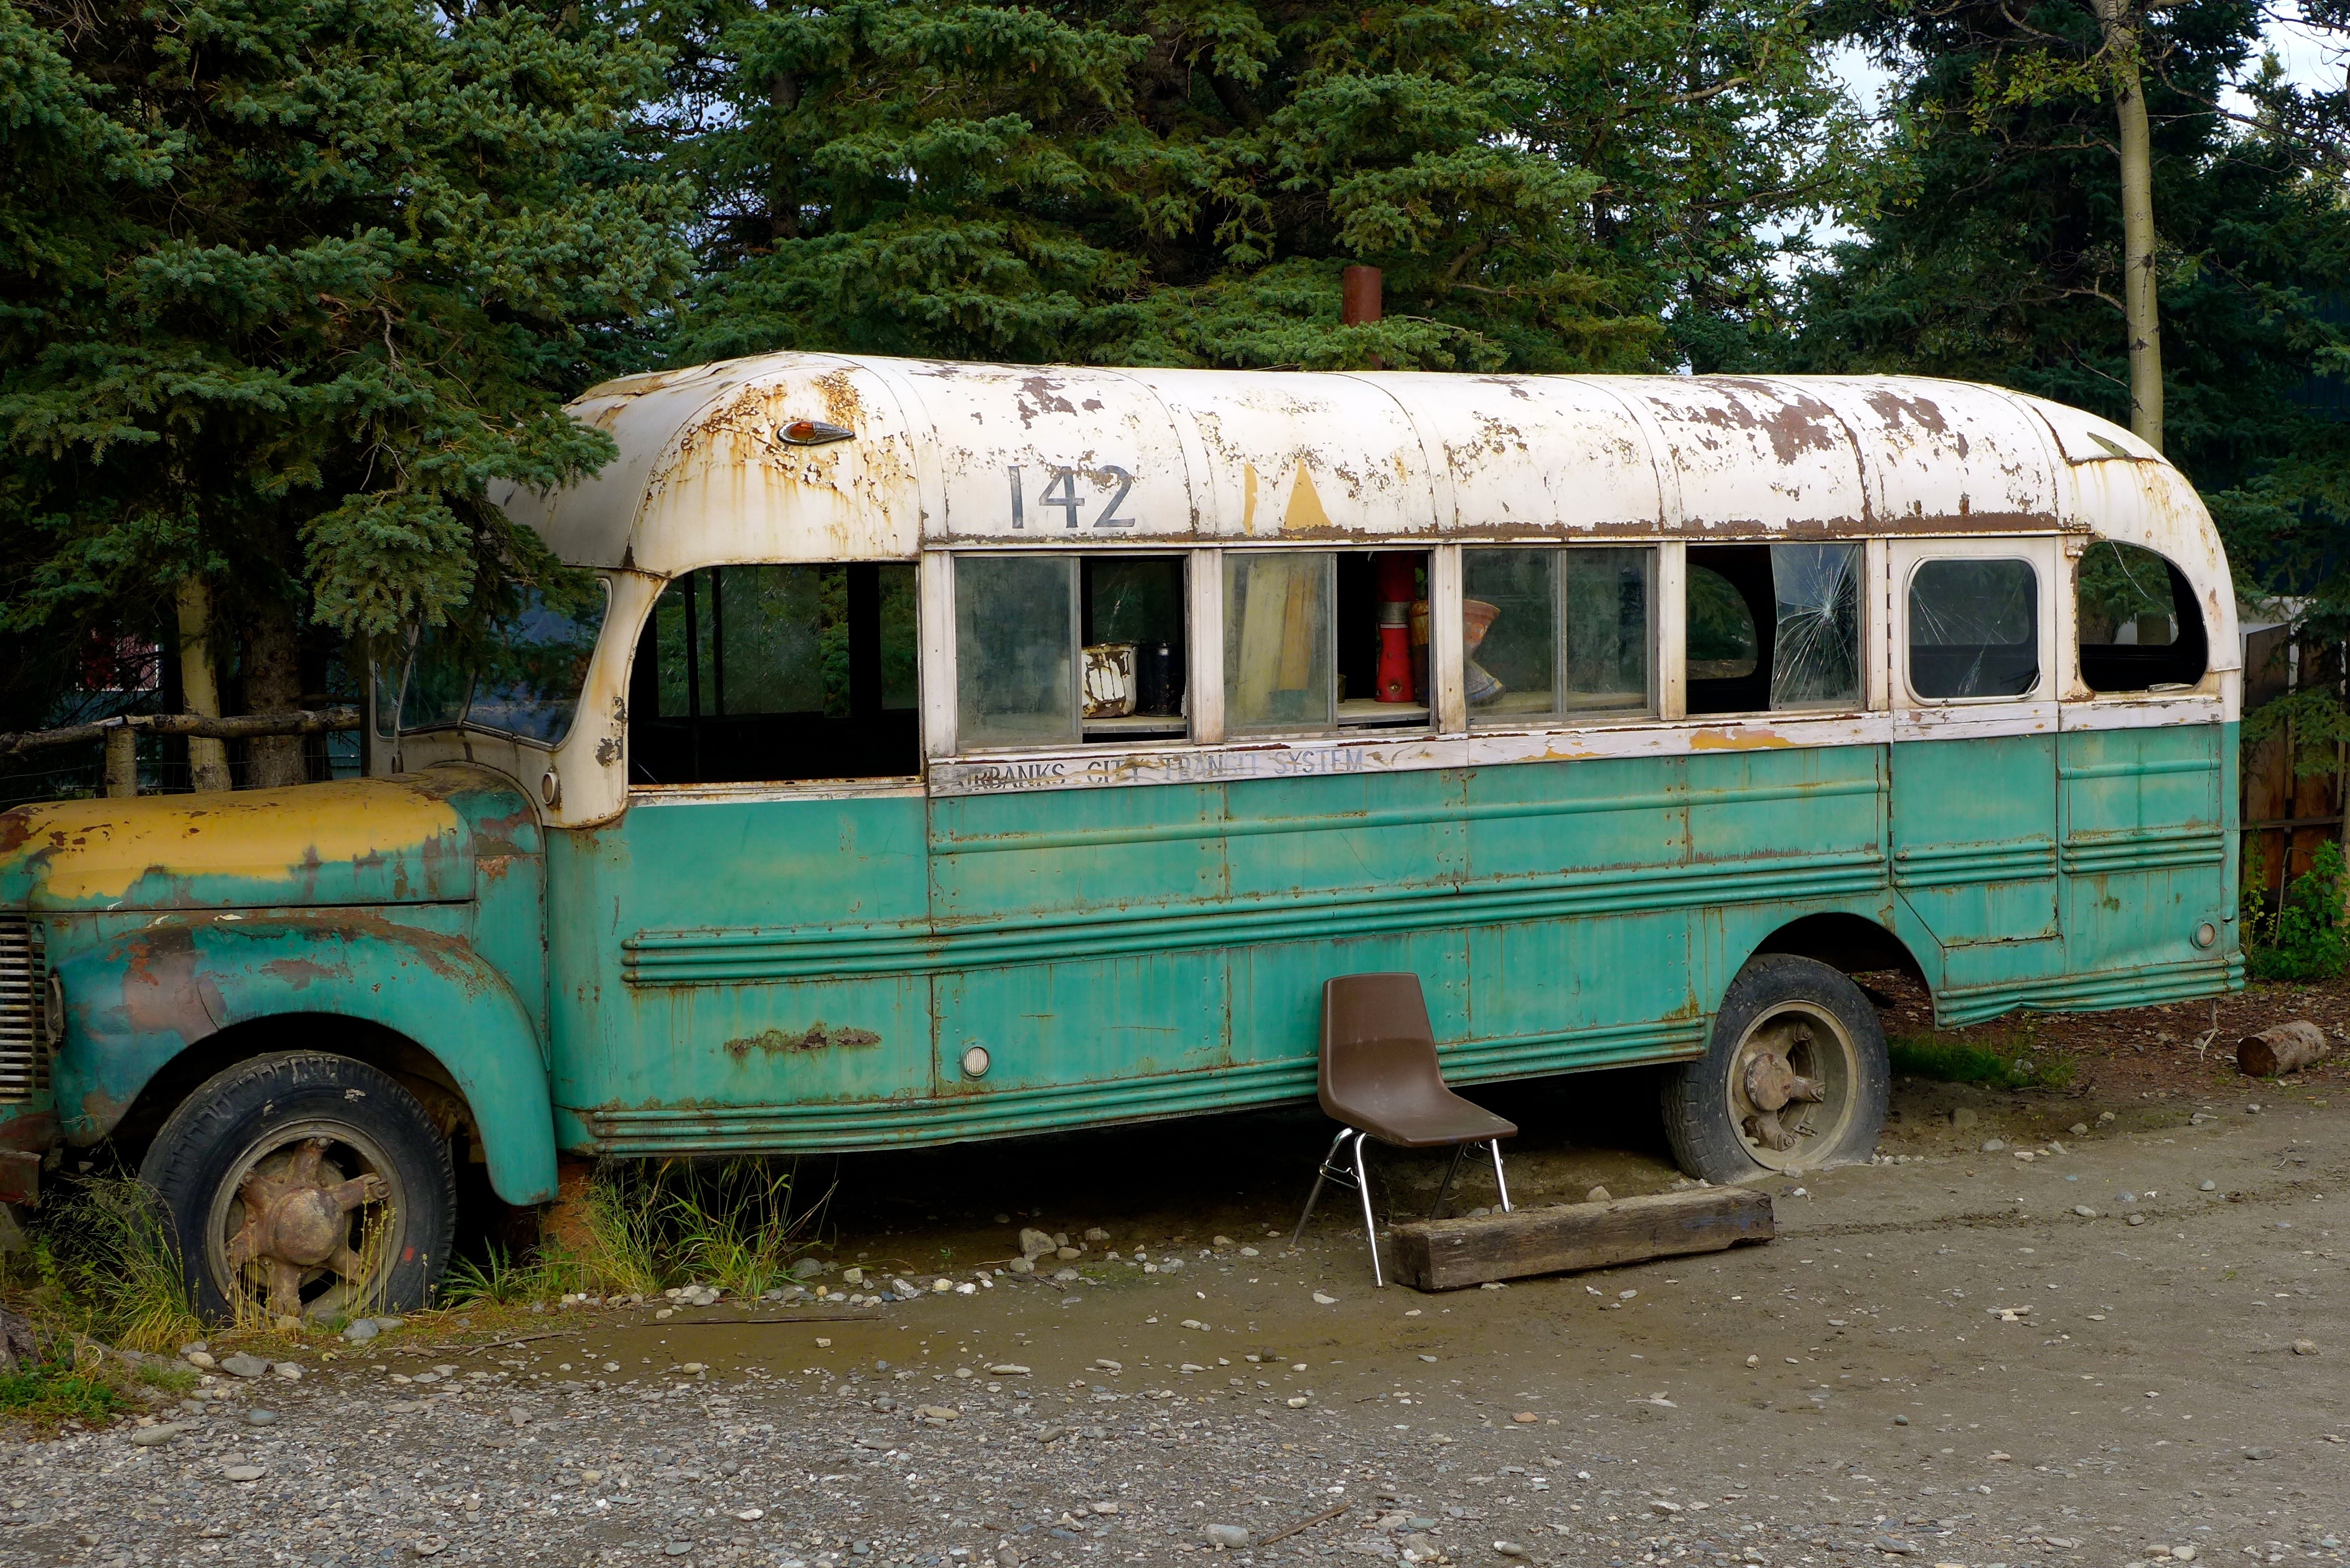 File:The replica of the school bus that Chris McCandless lived in ...